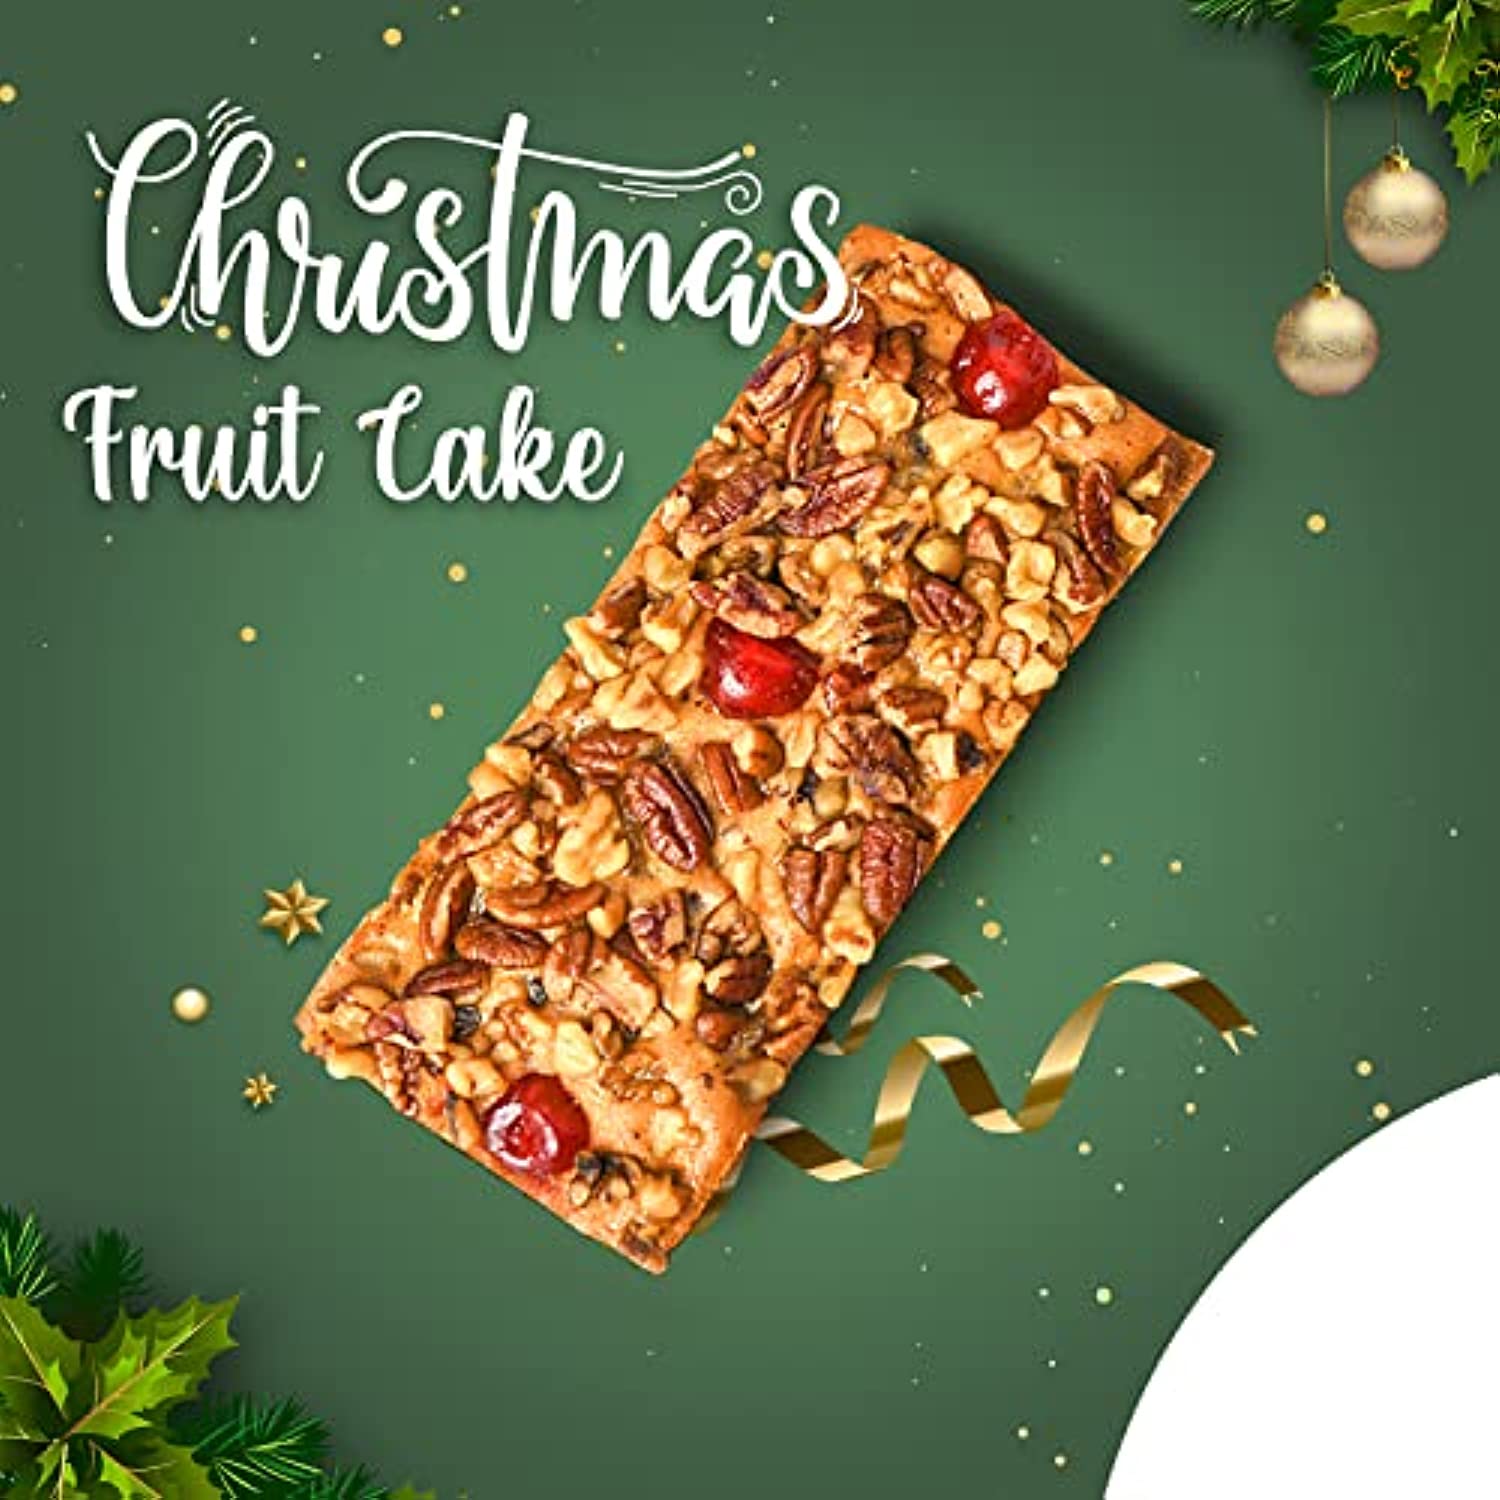 1LB Gourmet Fruit Cake Christmas Cake � Decadent Christmas Fruitcake and Celebration Cake � Christmas Fruit Cakes Filled with Cherries, Pineapple, Pecans, Walnuts, Raisins � Best Fruitcake w/ Festive Tin by Crave Island